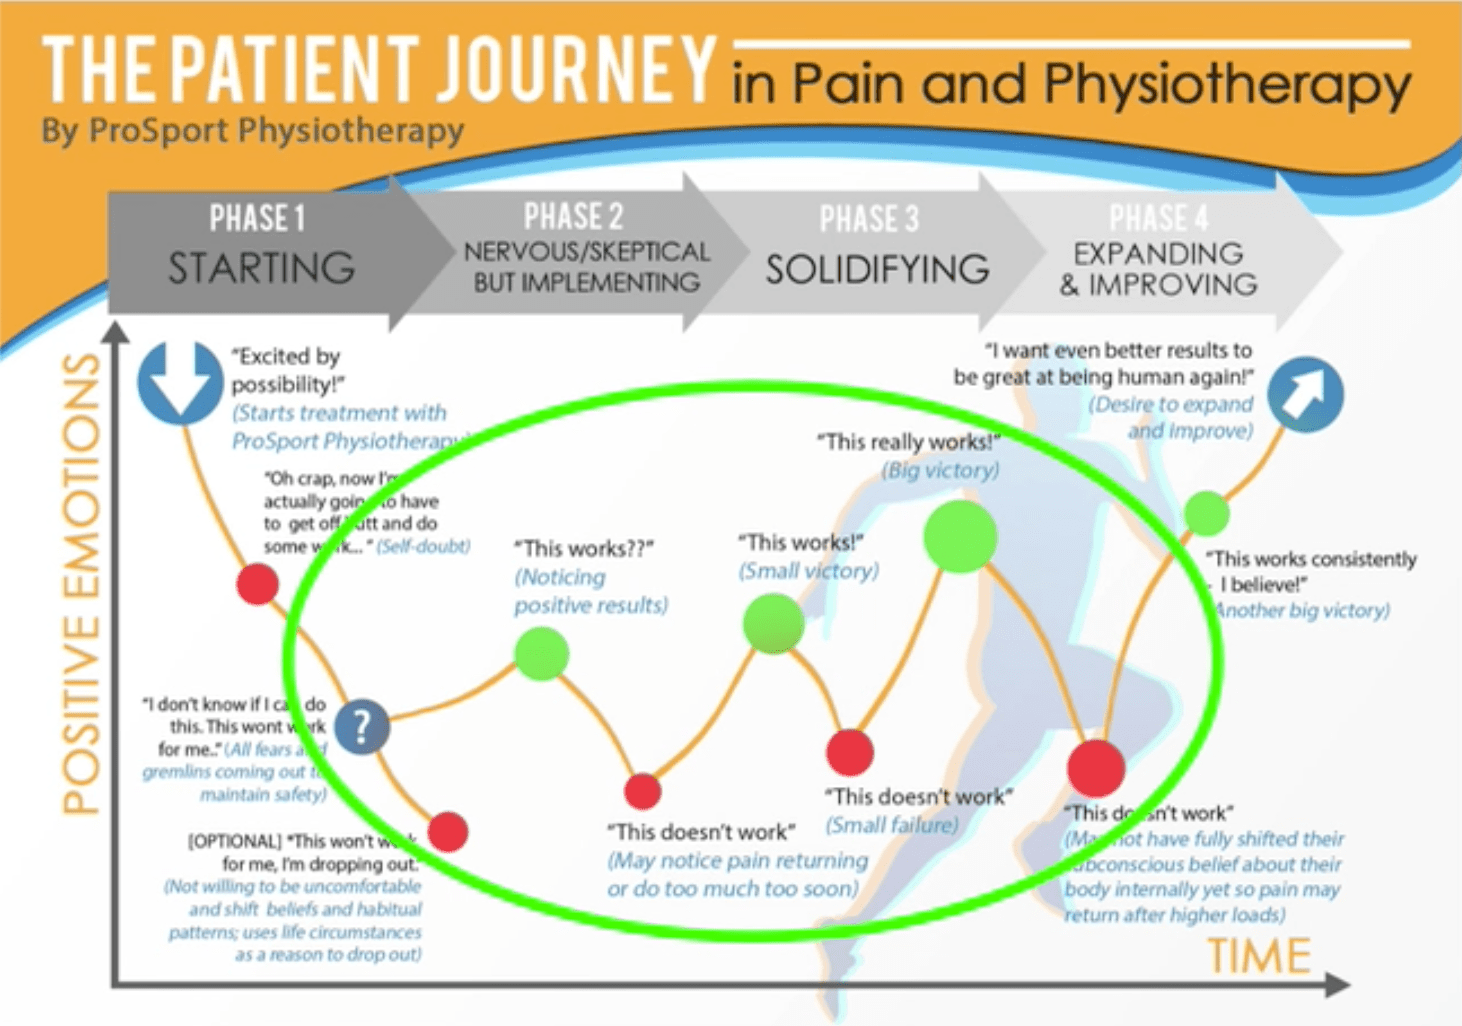 Patient journey in pain and cash-based physiotherapy